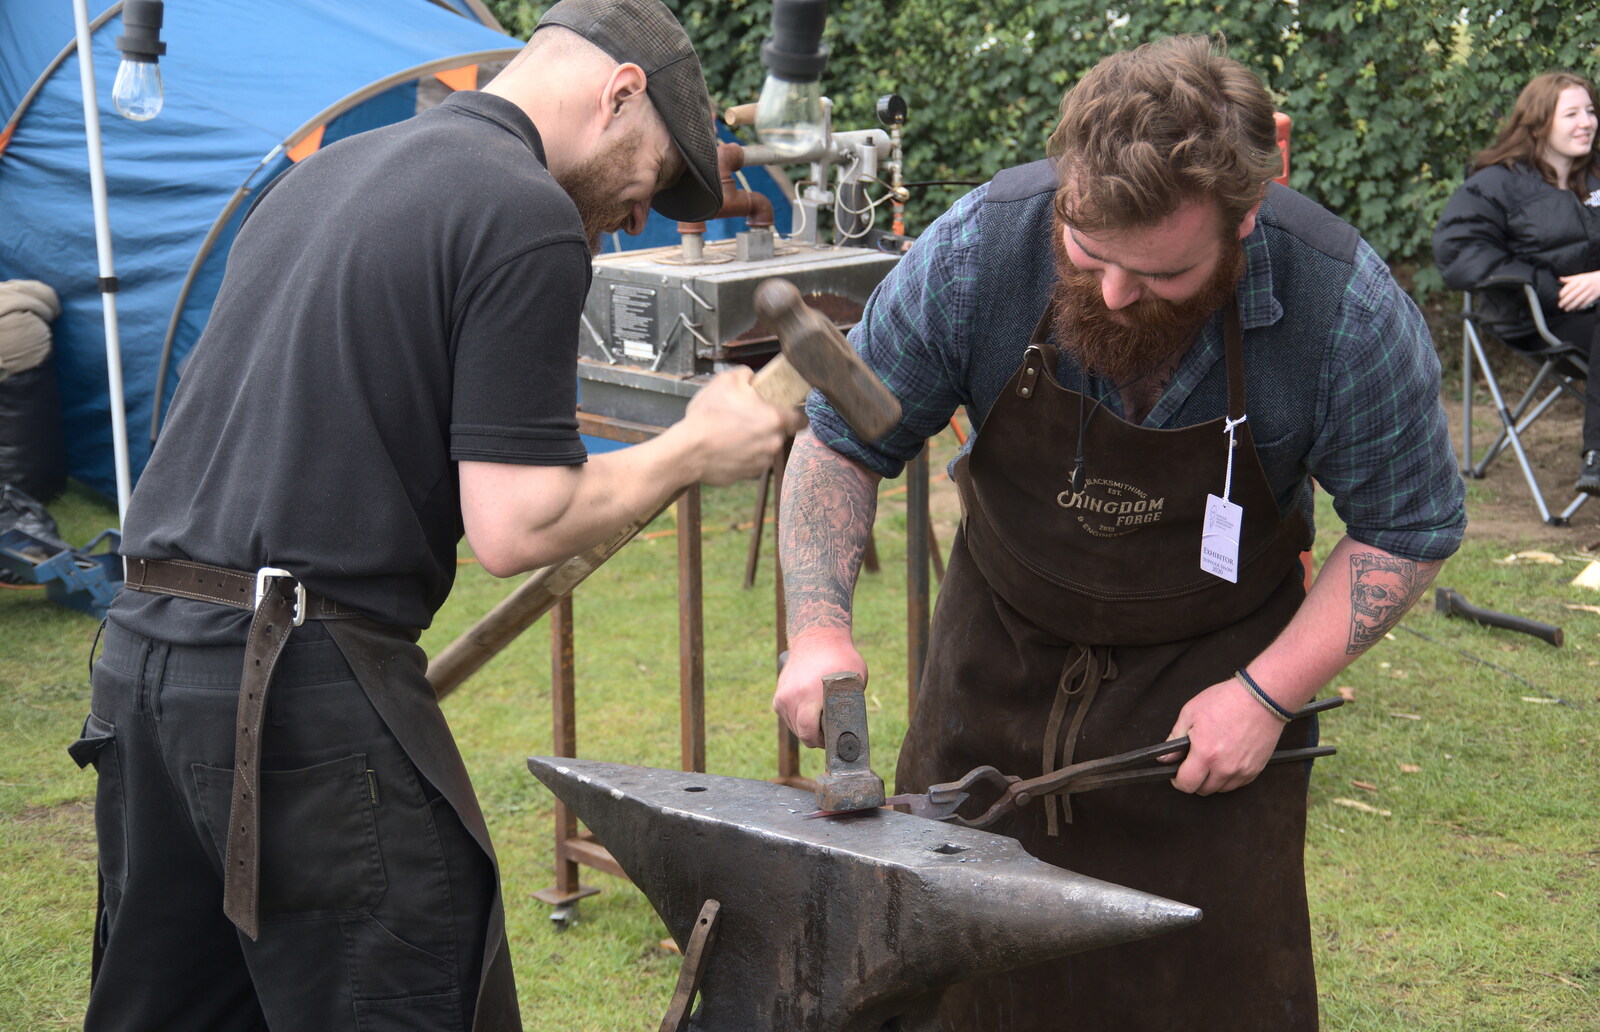 The Suffolk Show, Trinity Park, Ipswich - 1st June 2022: More hot-metal hammering